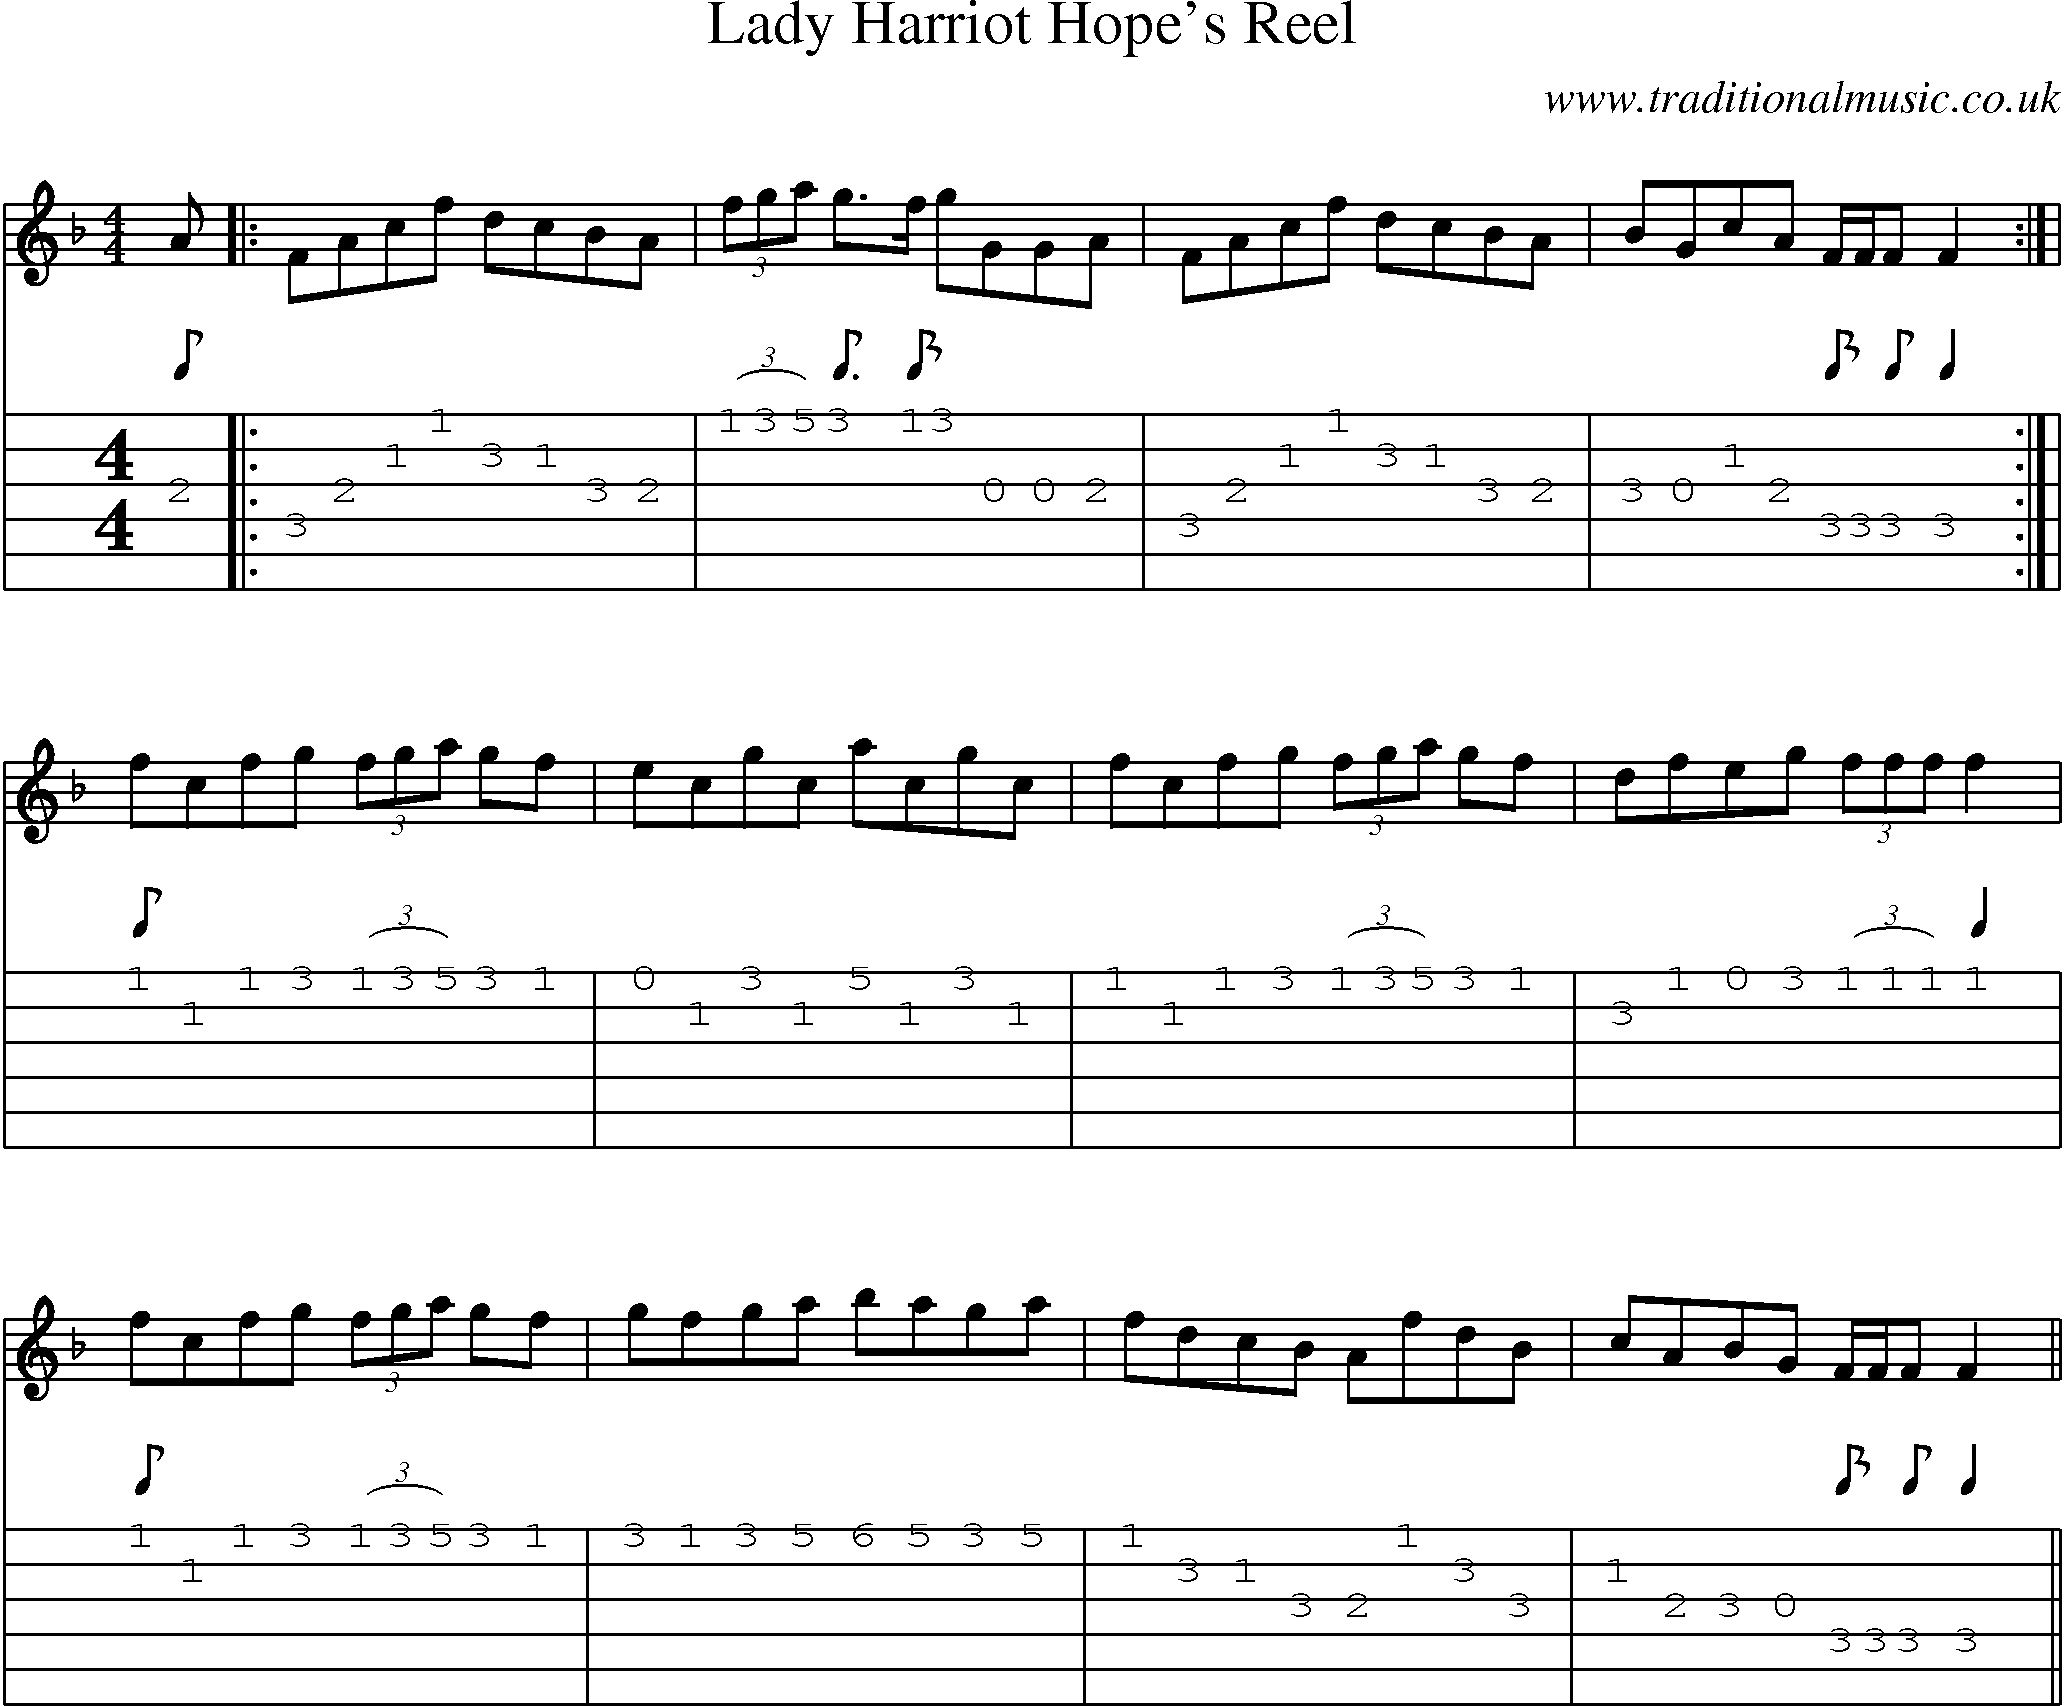 Music Score and Guitar Tabs for Lady Harriot Hopes Reel